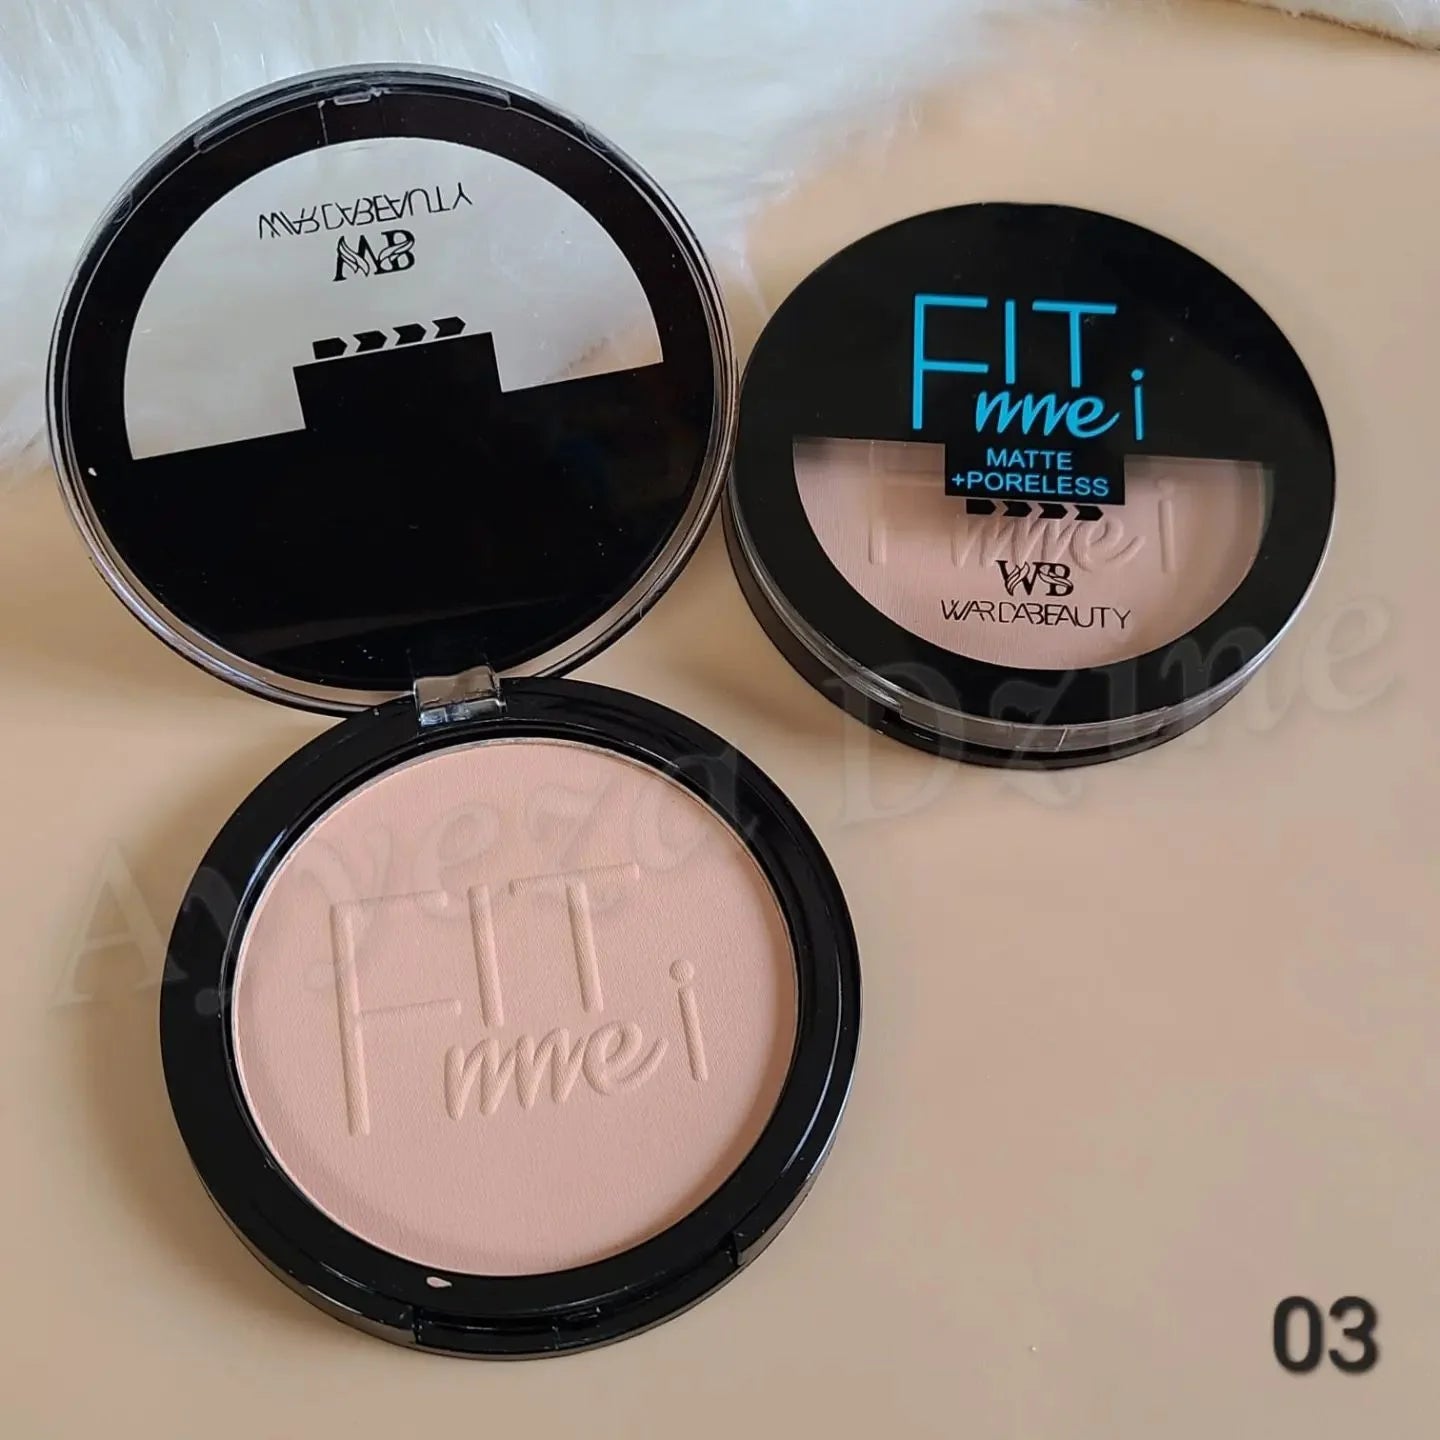 Wardabeauty Fitme Face Compact Powder